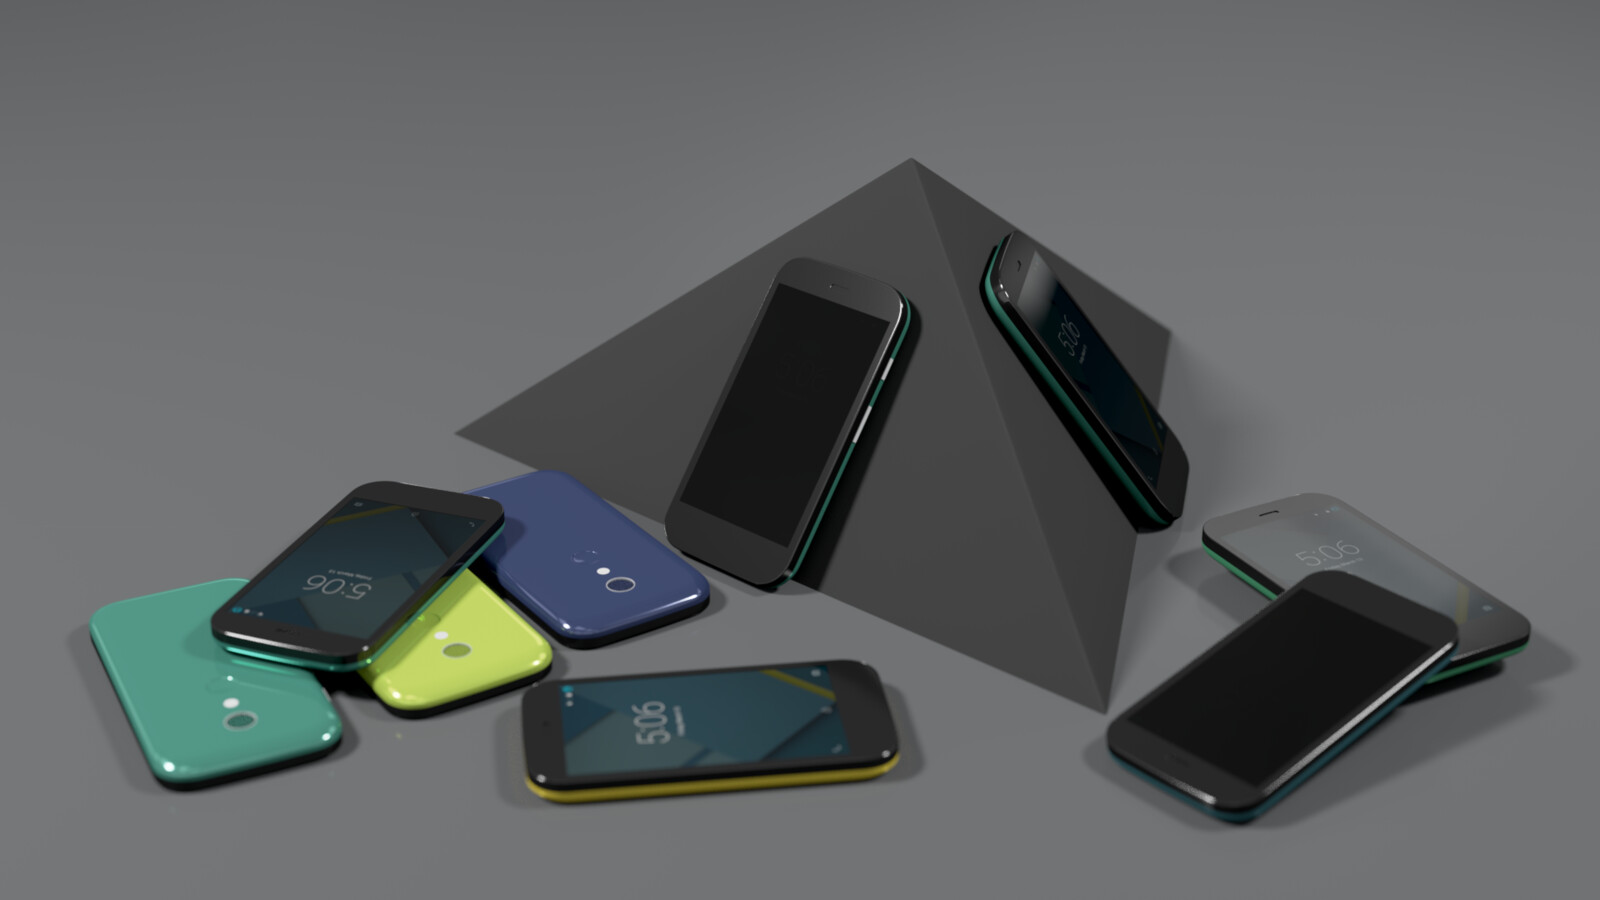 High-poly hard-surface model and beauty render.

This was a quick smartphone study. The referenced phone was Motorola Moto G, the modelling and texturing were made in Blender.